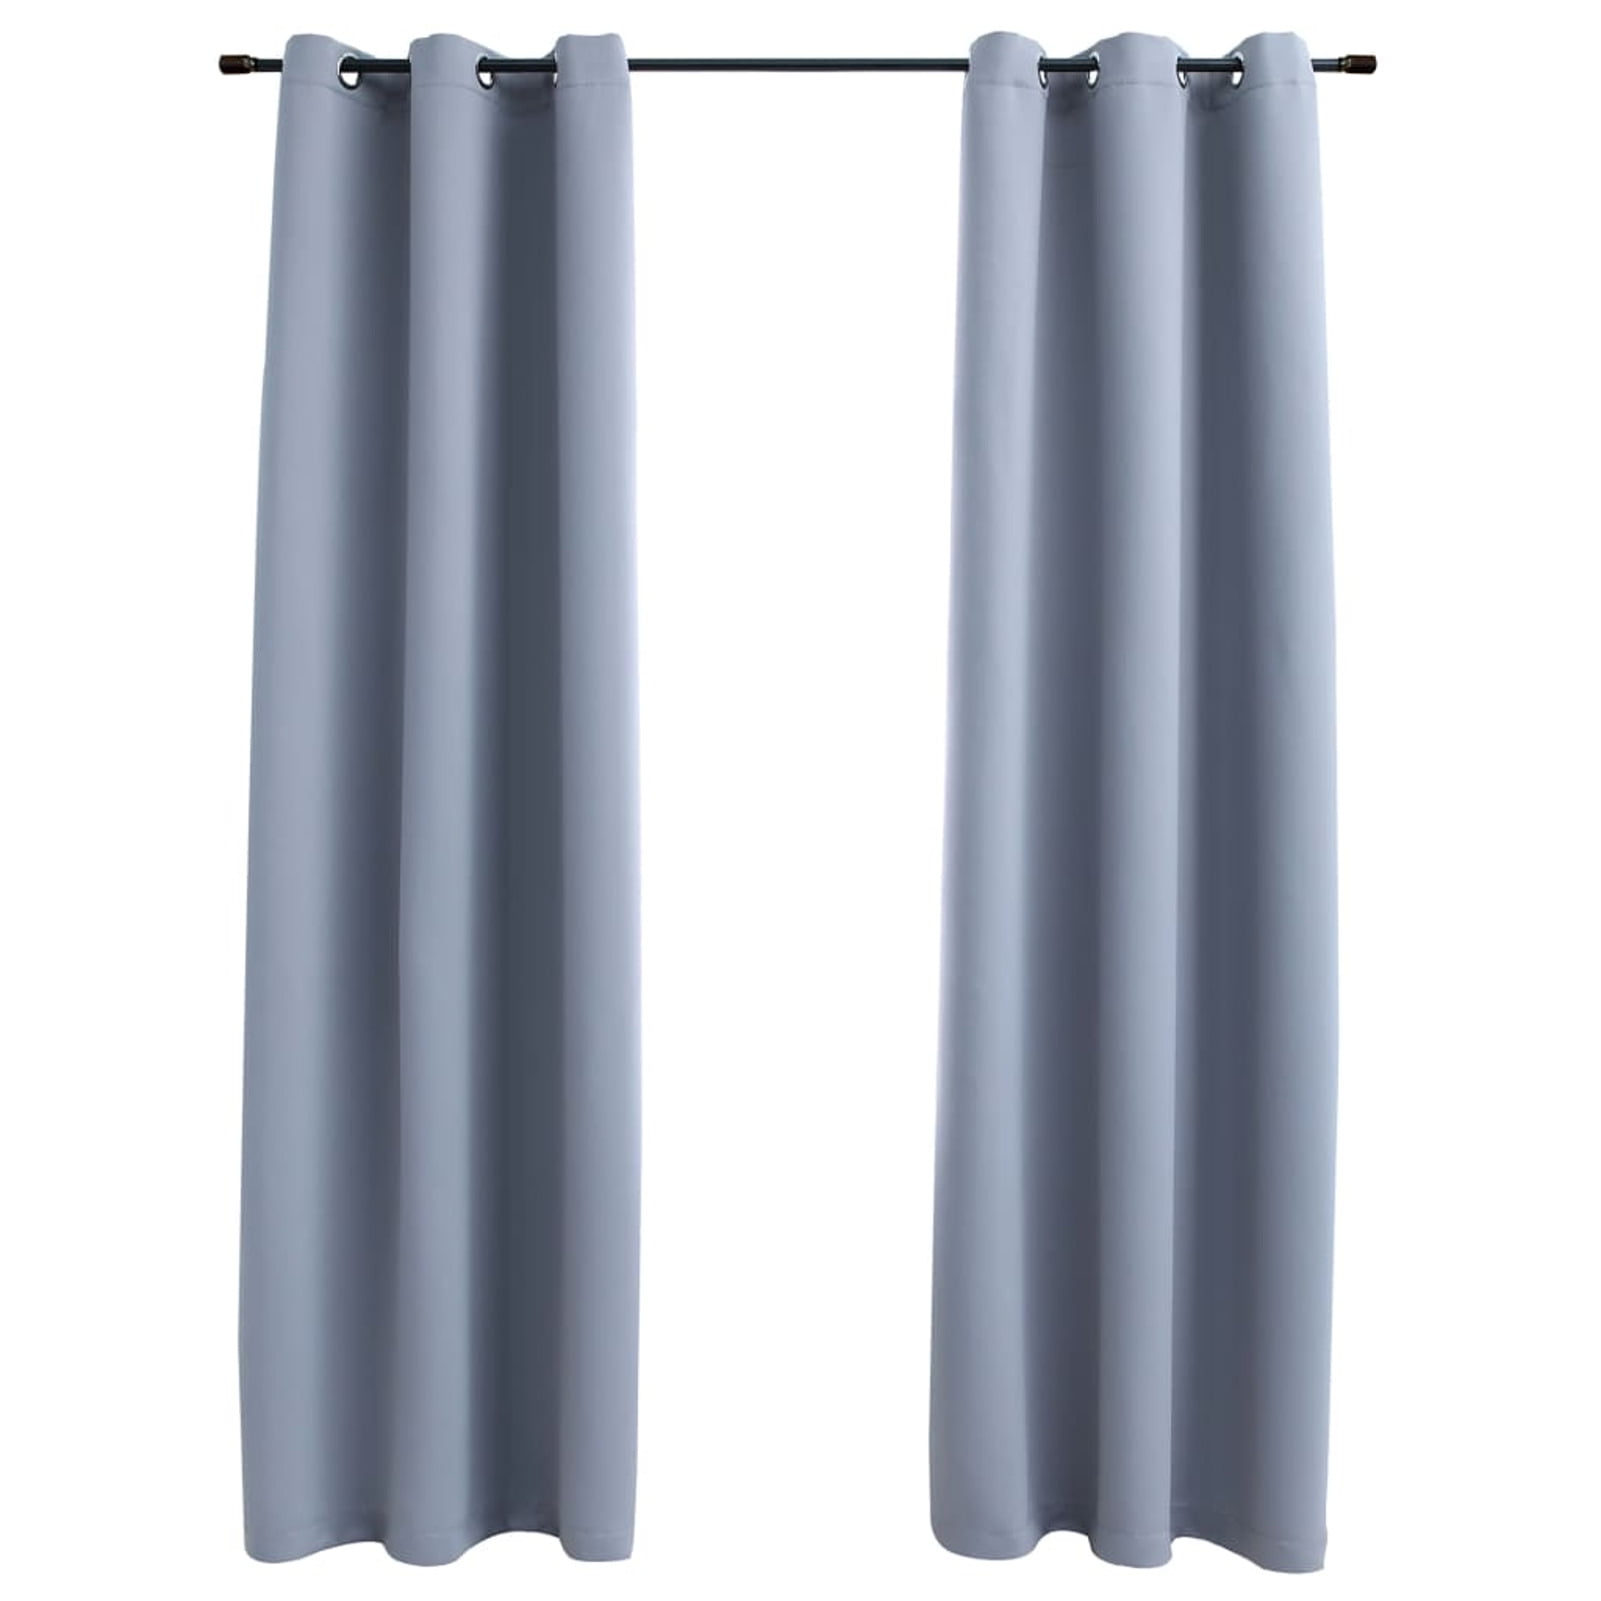 Sunbrella Canvas White Outdoor Curtain 50 in x 108 in w/ Nickel Grommets |  CUR108WTGRS-N